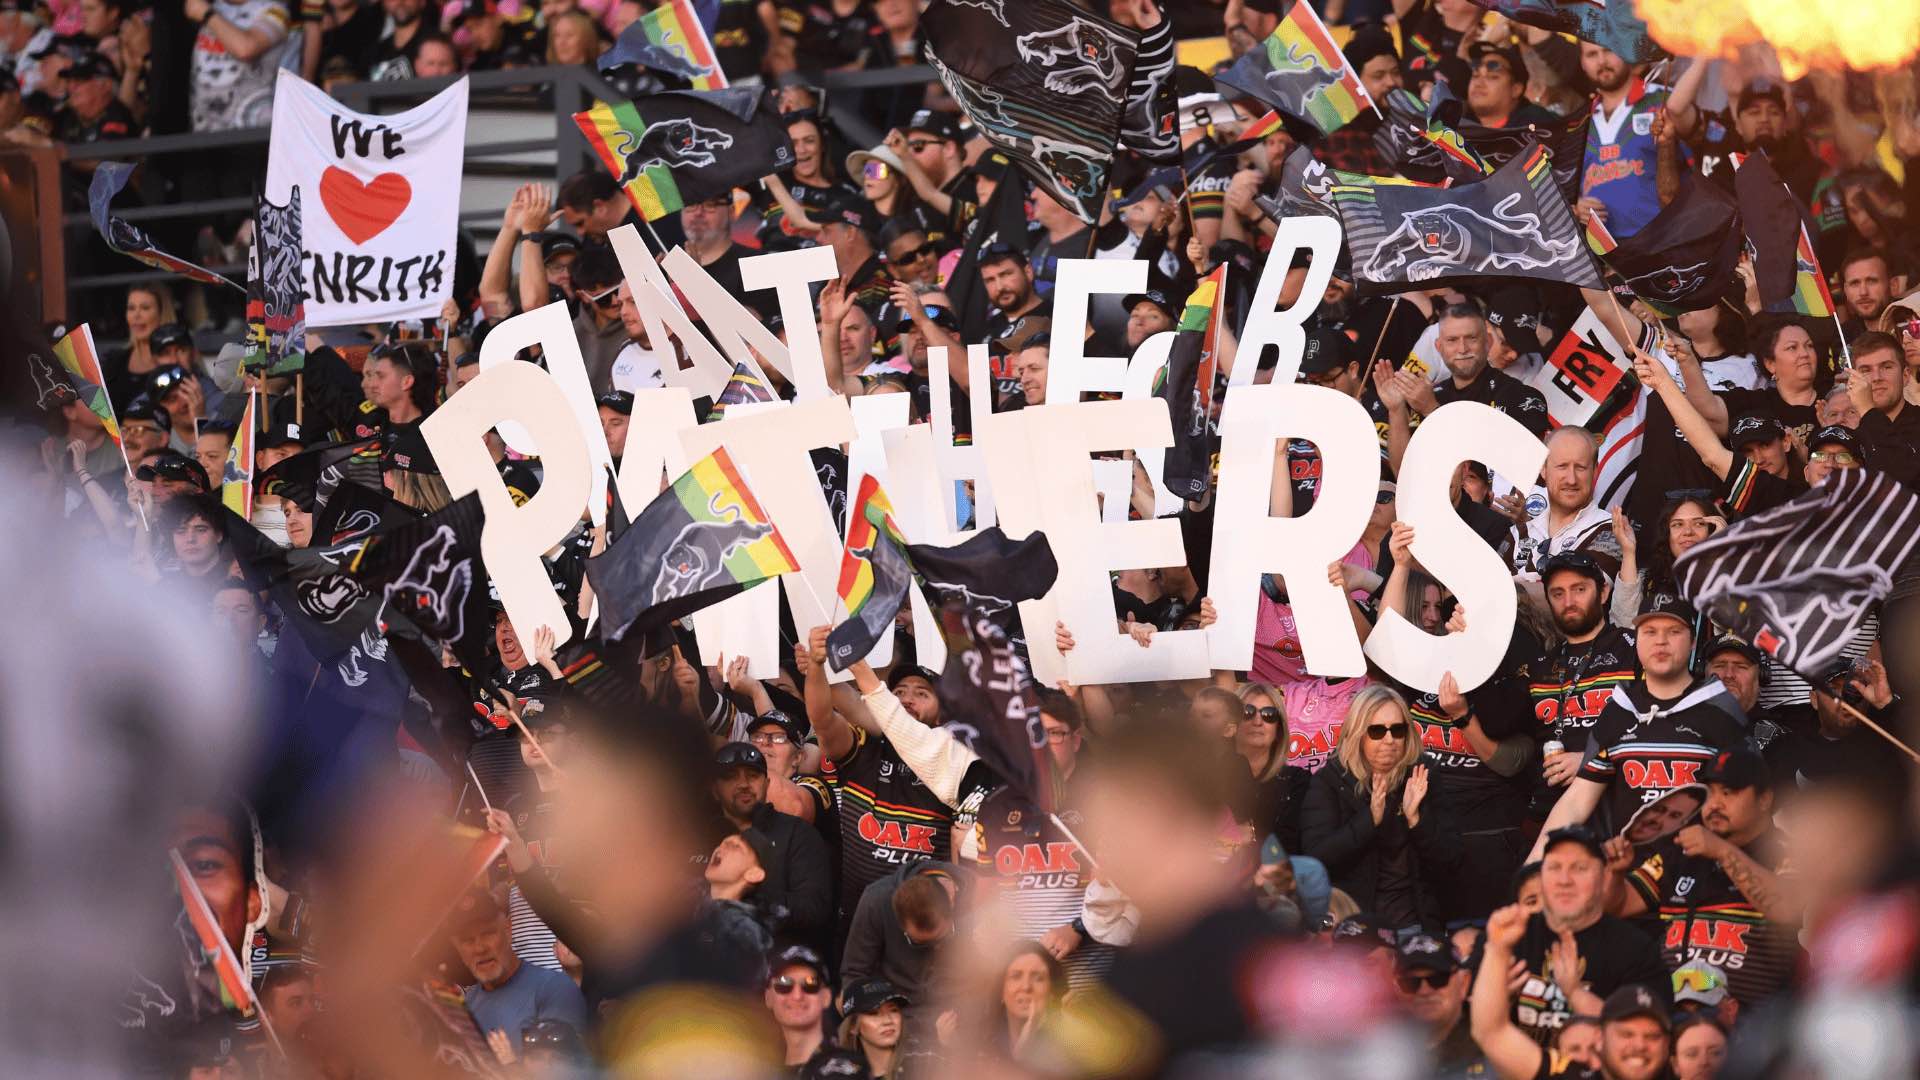 Penrith Panthers fans in the stands.